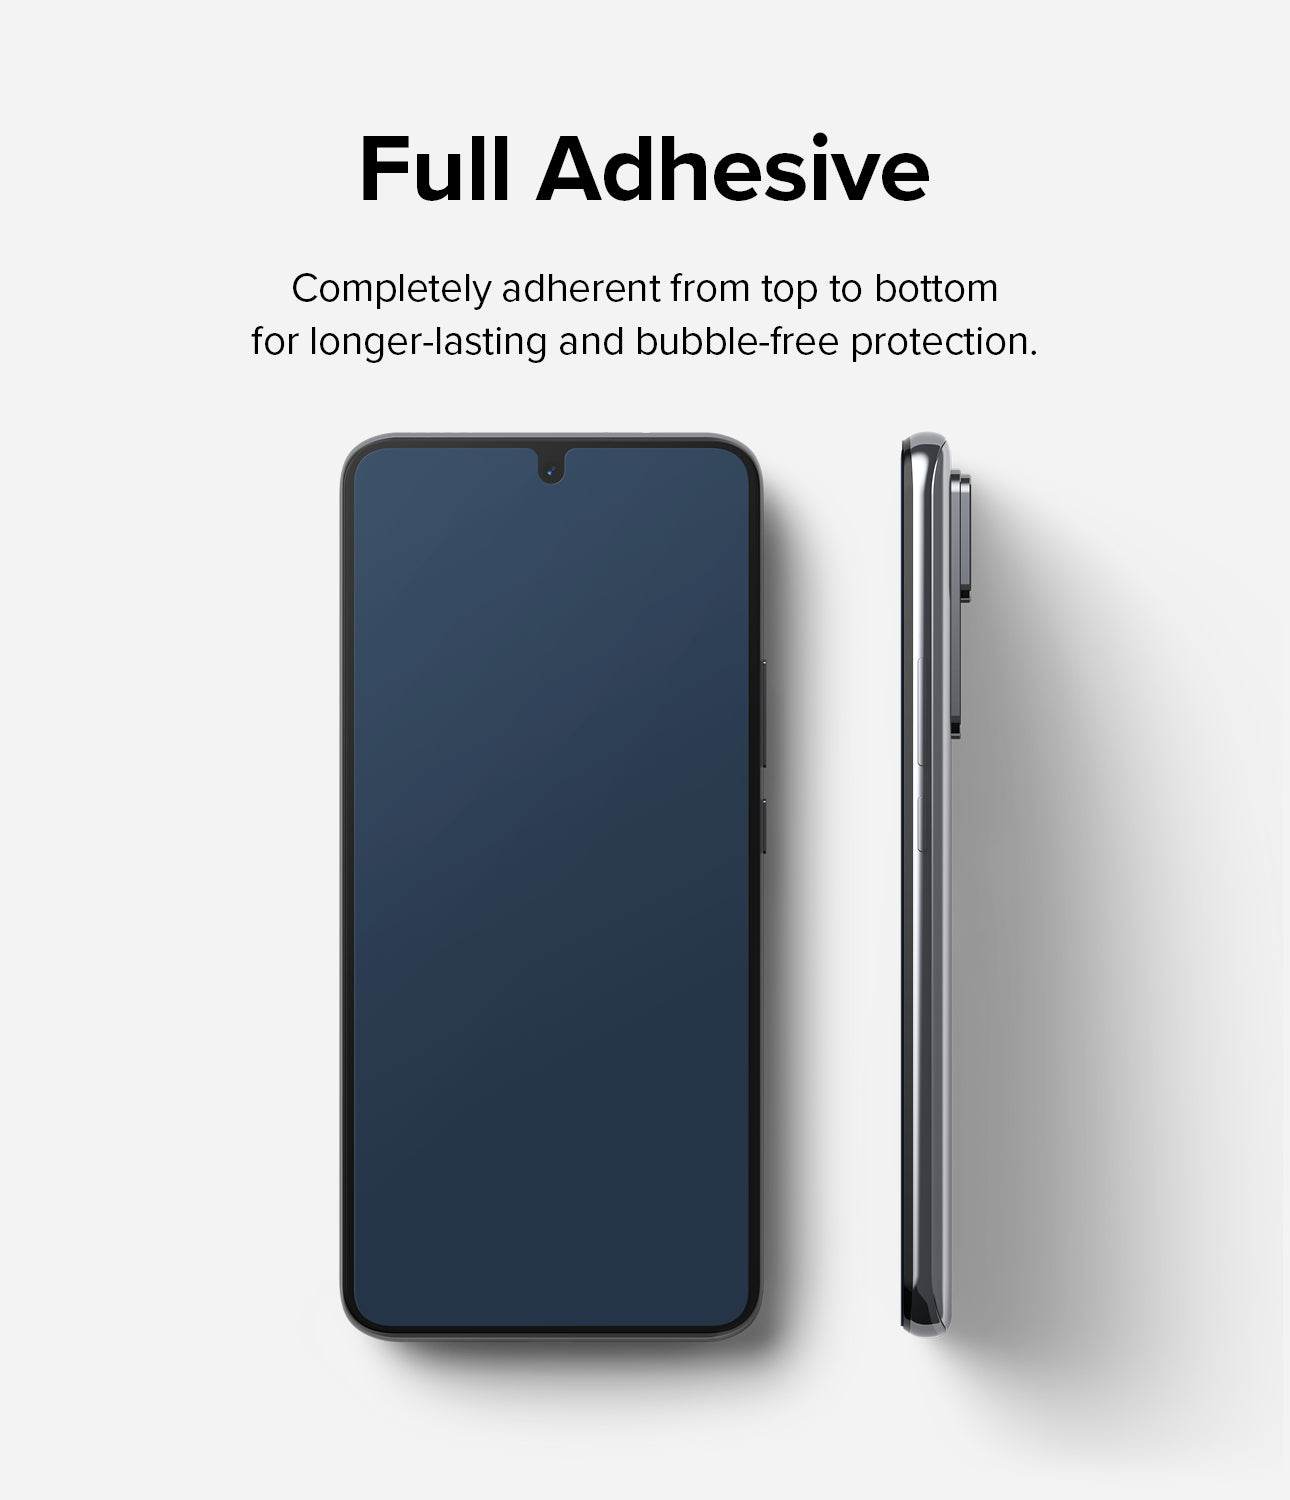 Full Adhesive - Completely adherent from top to bottom for longer-lasting and bubble-free protection.